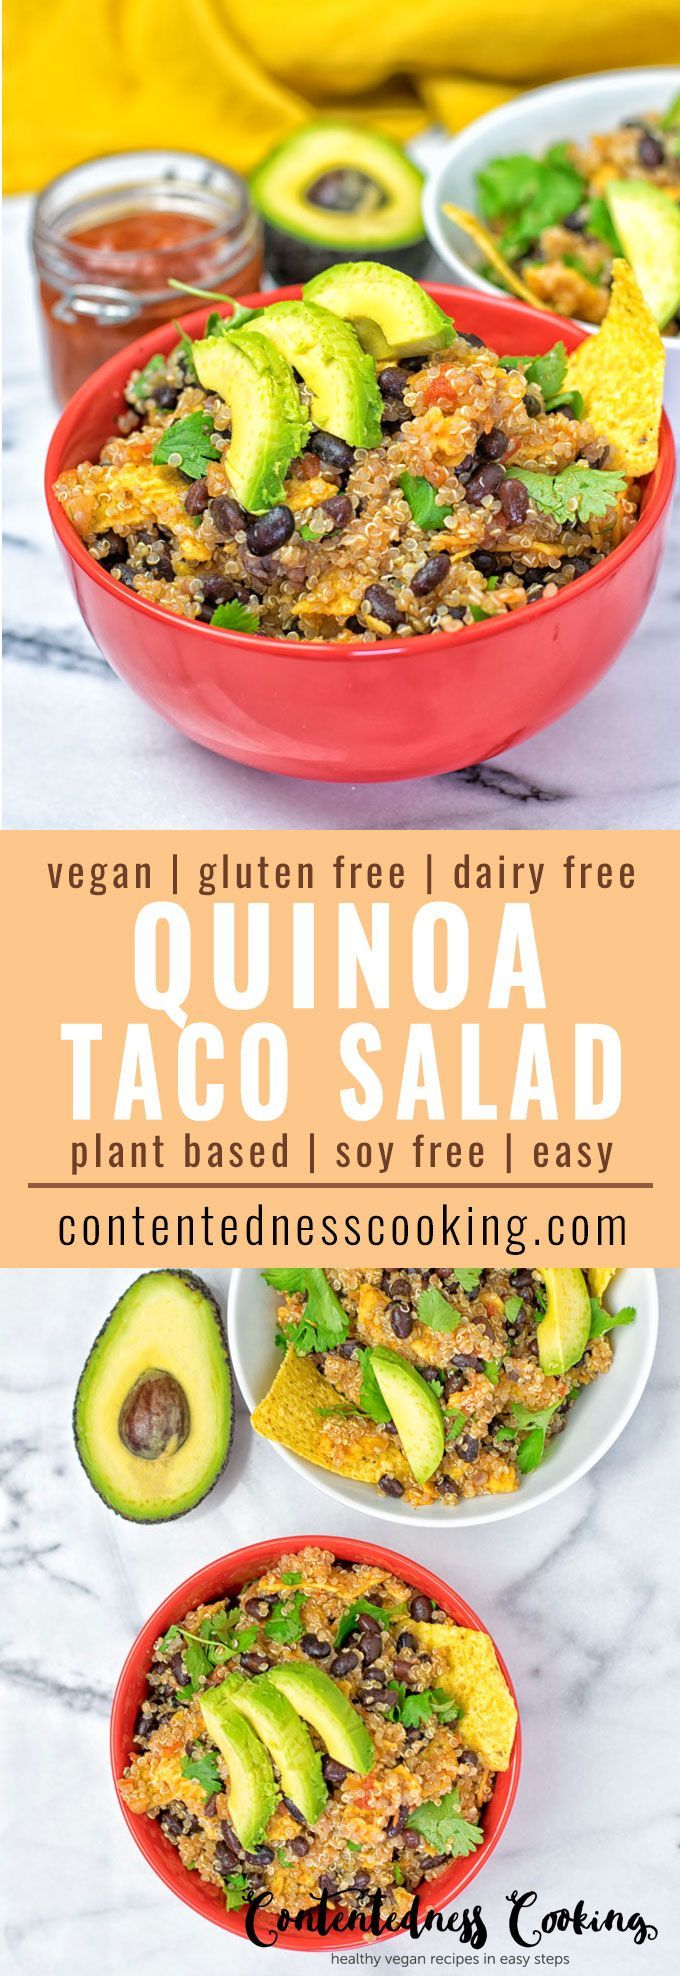 Enjoy this vegan Quinoa Taco Salad made with just 5 ingredients in 2 easy steps. A plant-based, gluten free, Mexican delight with